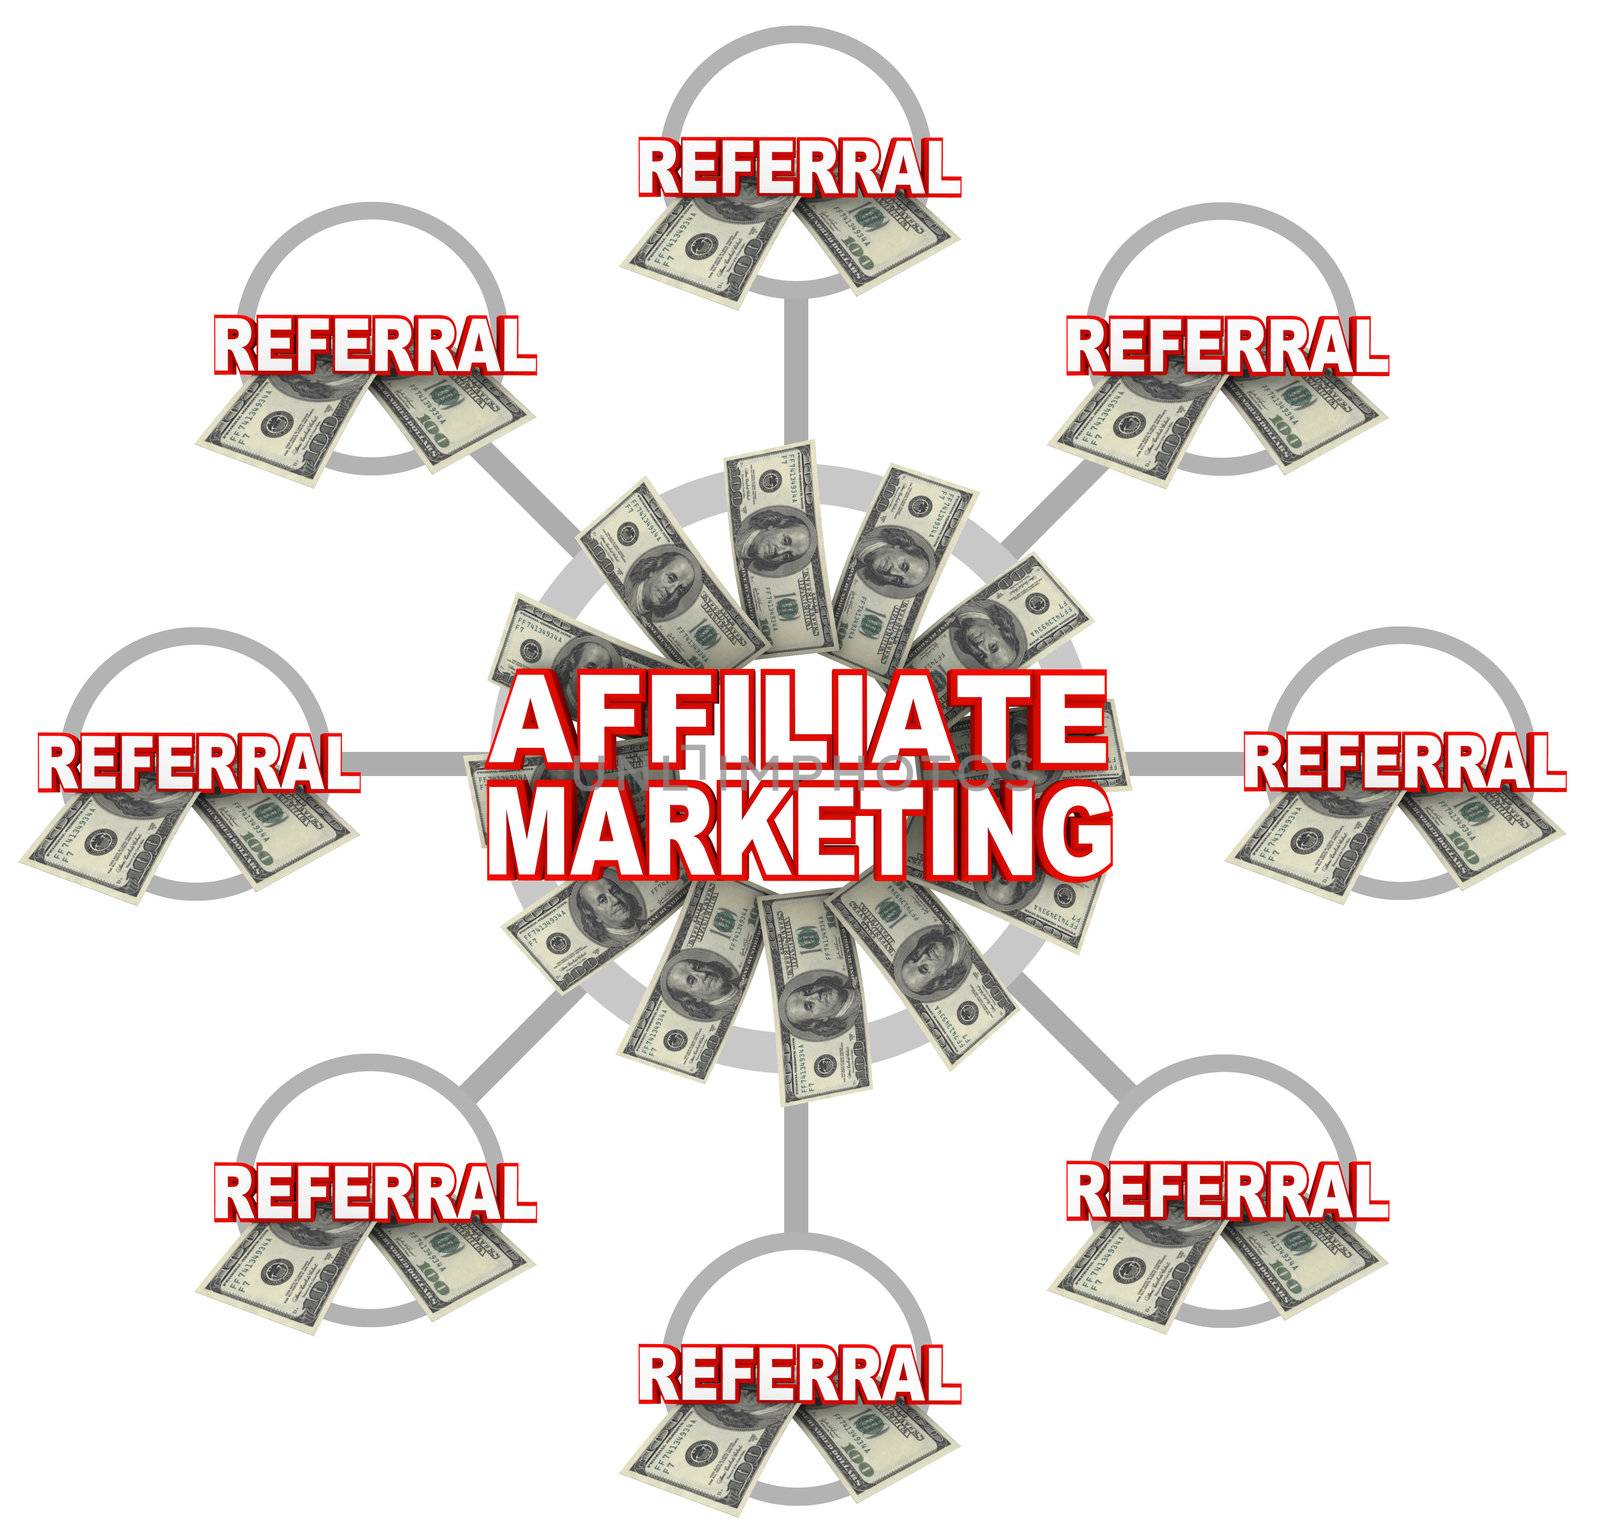 An Affiliate Marketing grid showing the words in the center of the circle and many instances of the word Referral and money all feeding into the central unit of this scheme to make someone rich quick